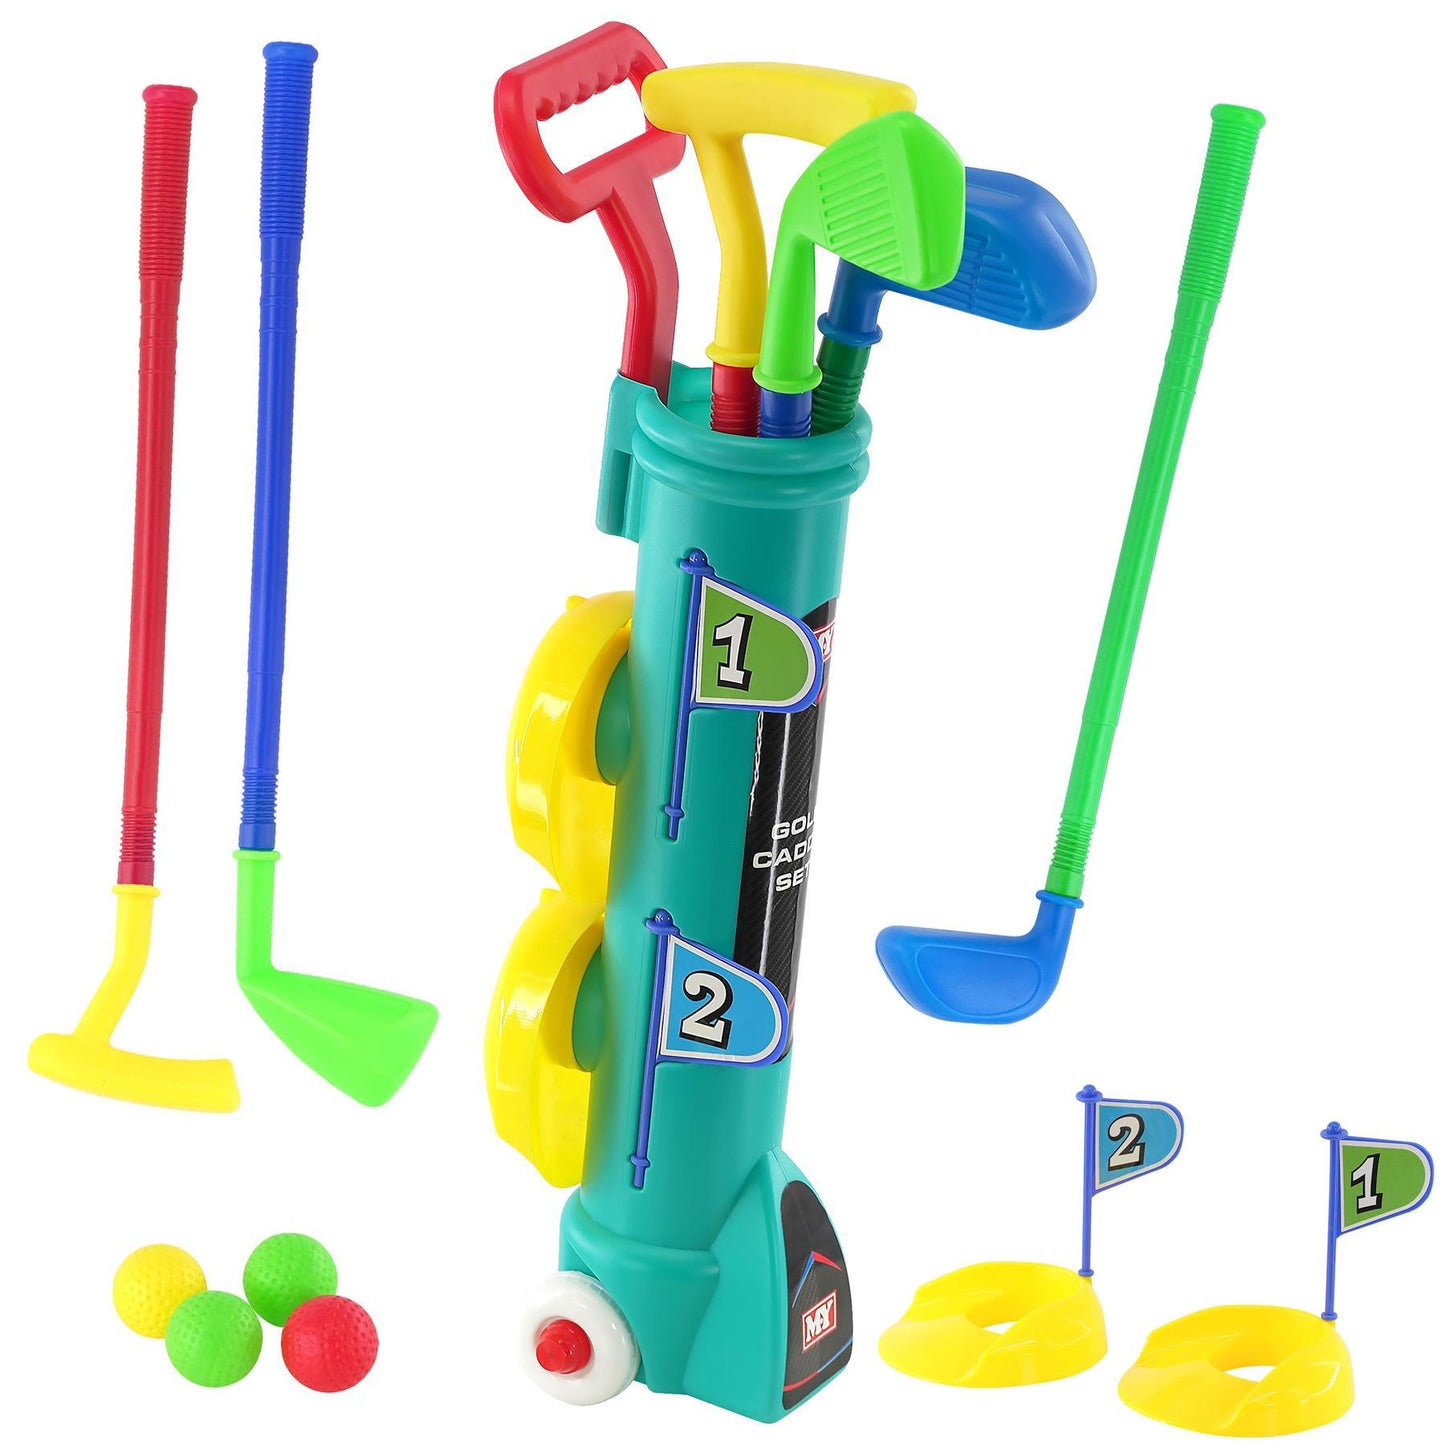 Children's Junior Golf Playset by The Magic Toy Shop - UKBuyZone